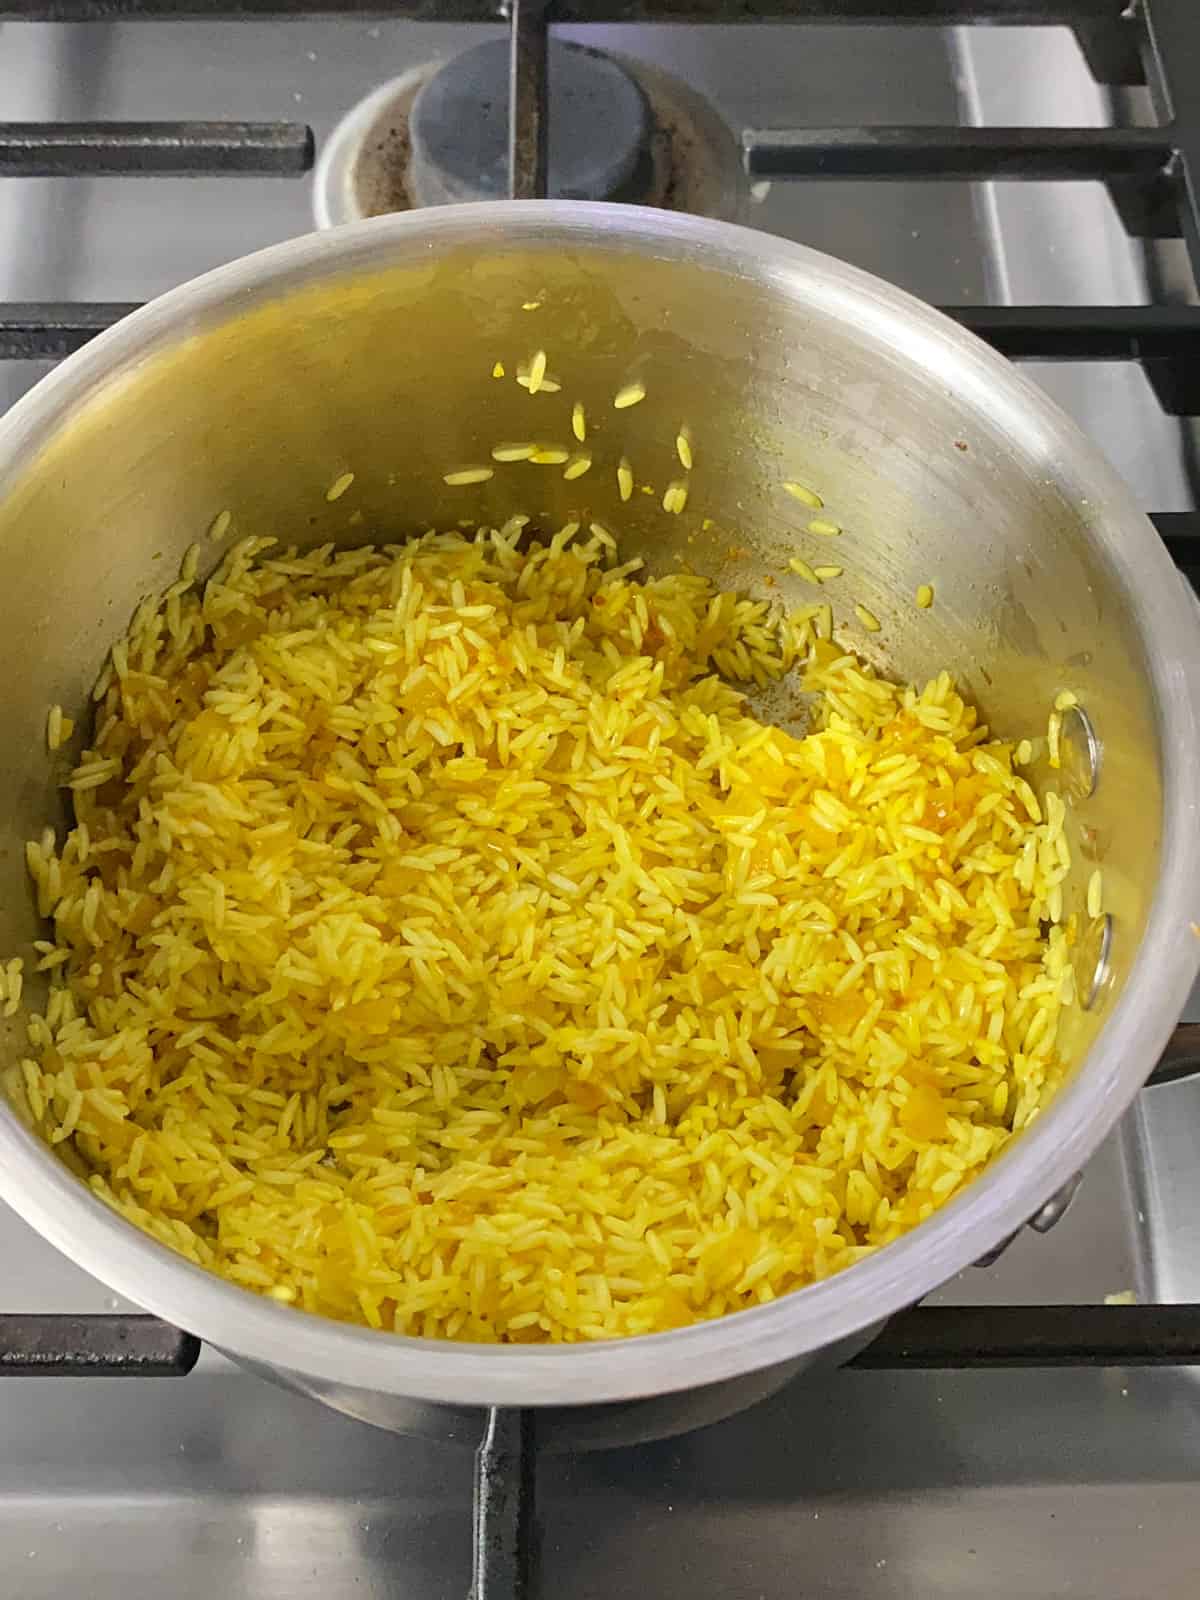 Saute the basmati rice in the infused olive oil until all of the grains are lightly toasted.